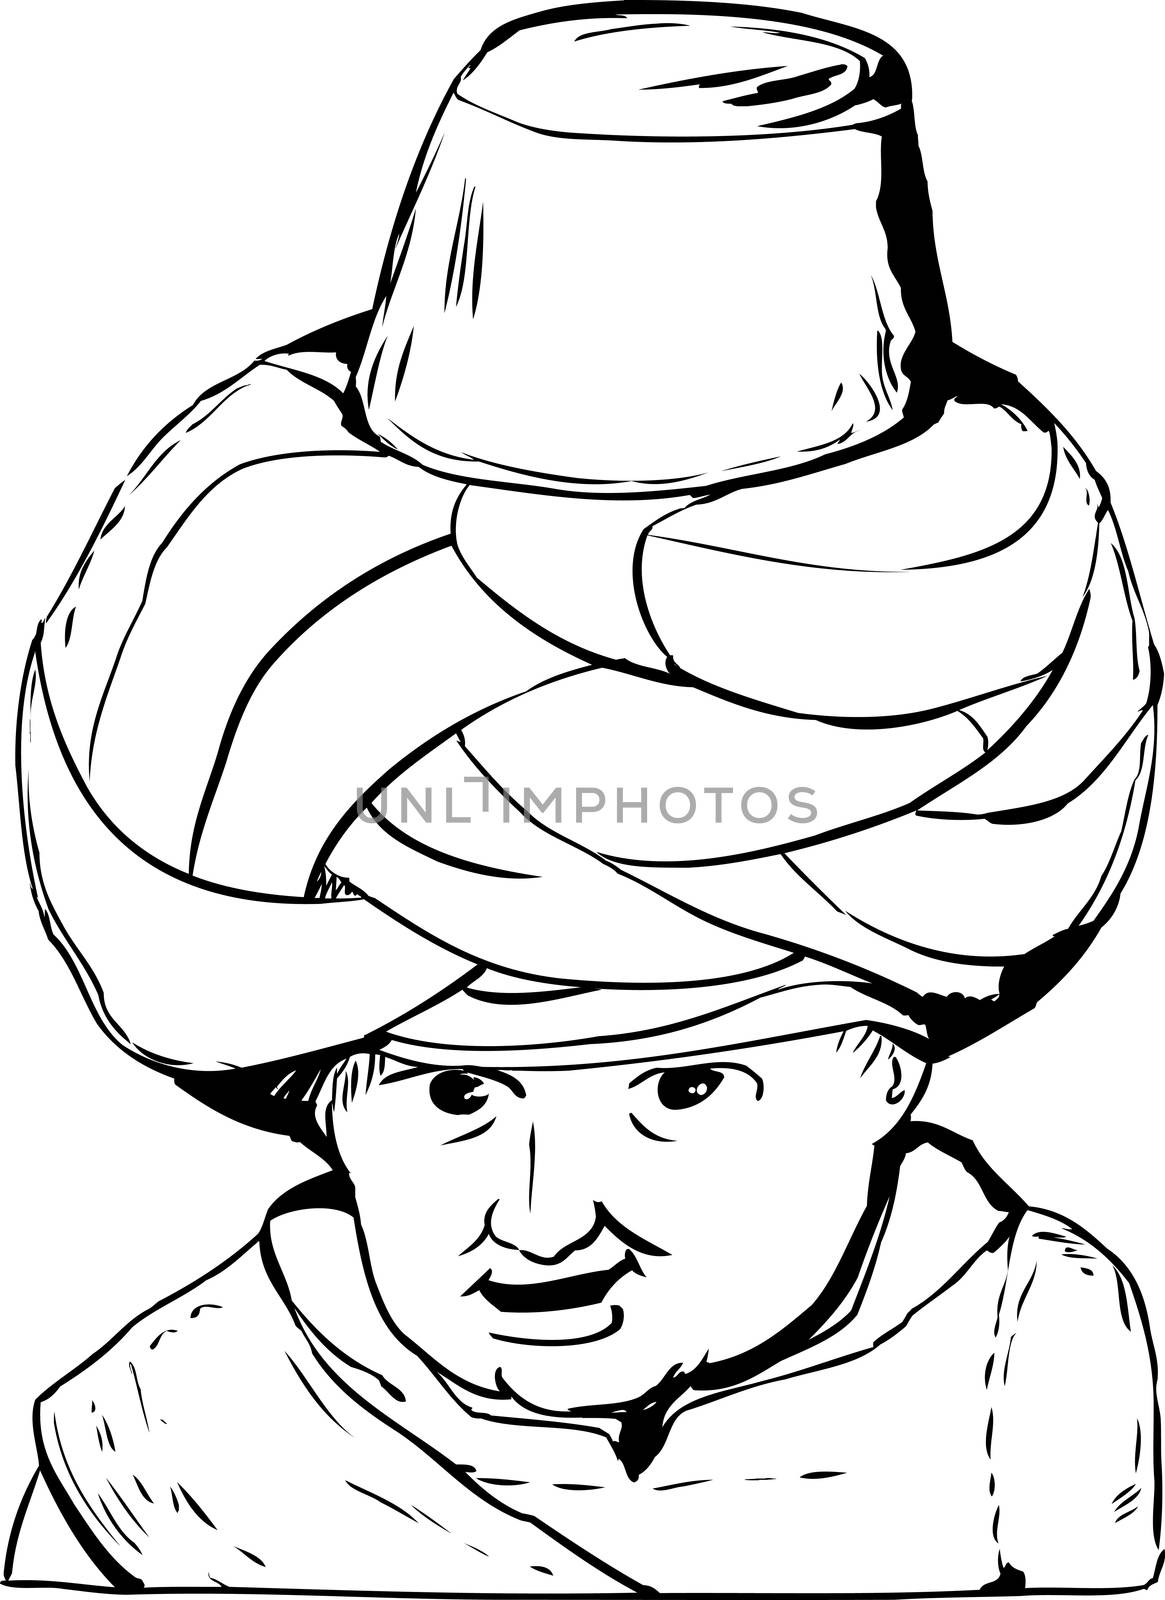 Sketch outline close up on smiling face of 18th century Arab or Turkish Muslim doll over white background